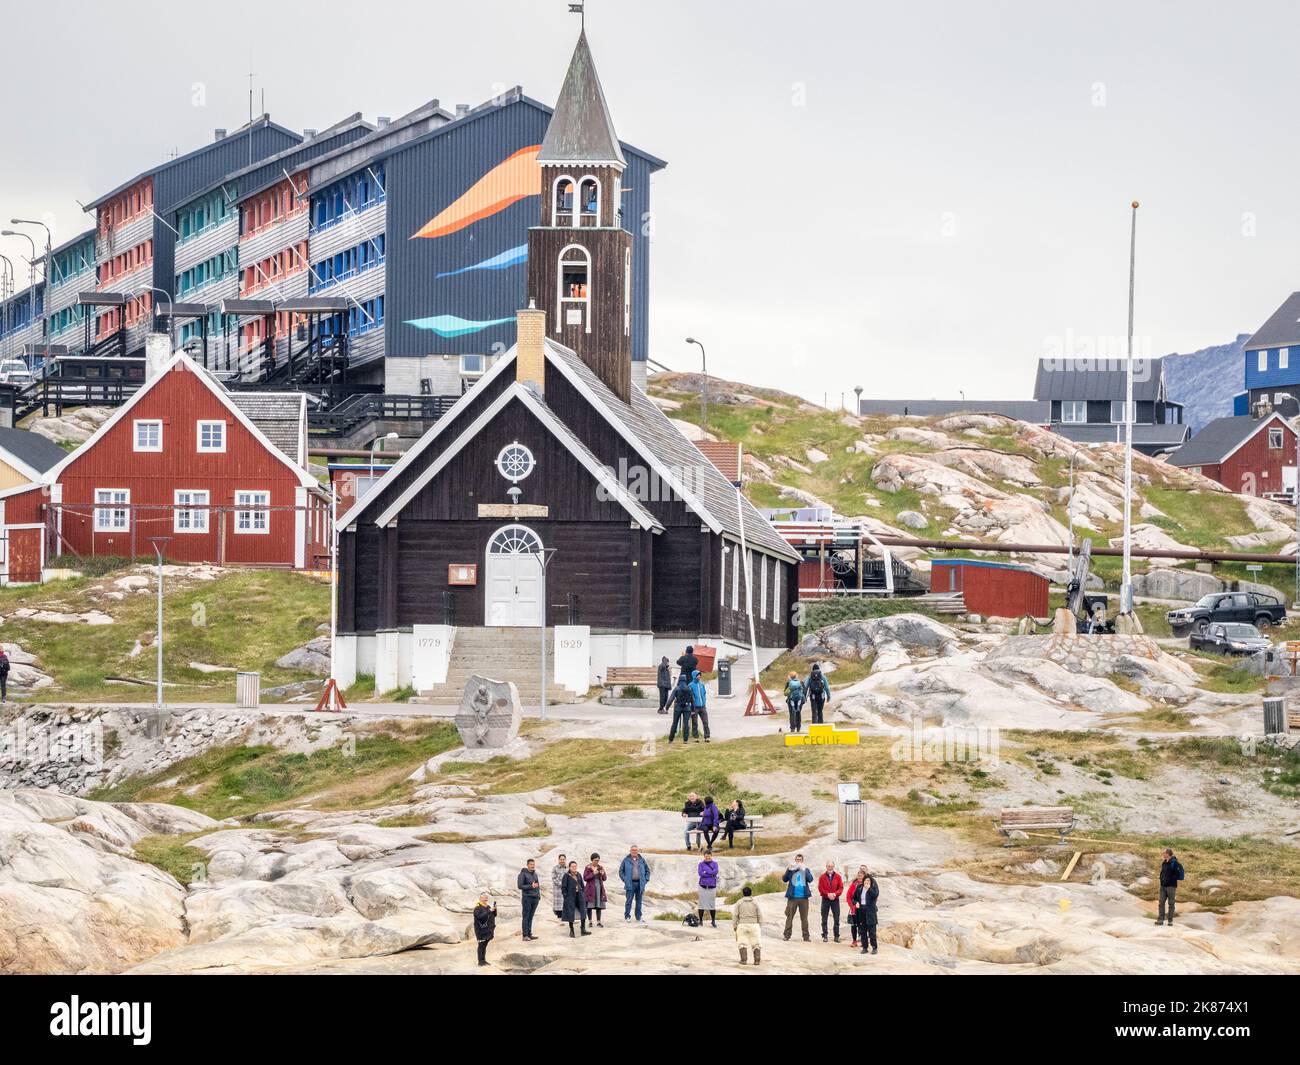 A view of Zion's Church surrounded by colorfully painted houses in the city of Ilulissat, Greenland, Denmark, Polar Regions Stock Photo